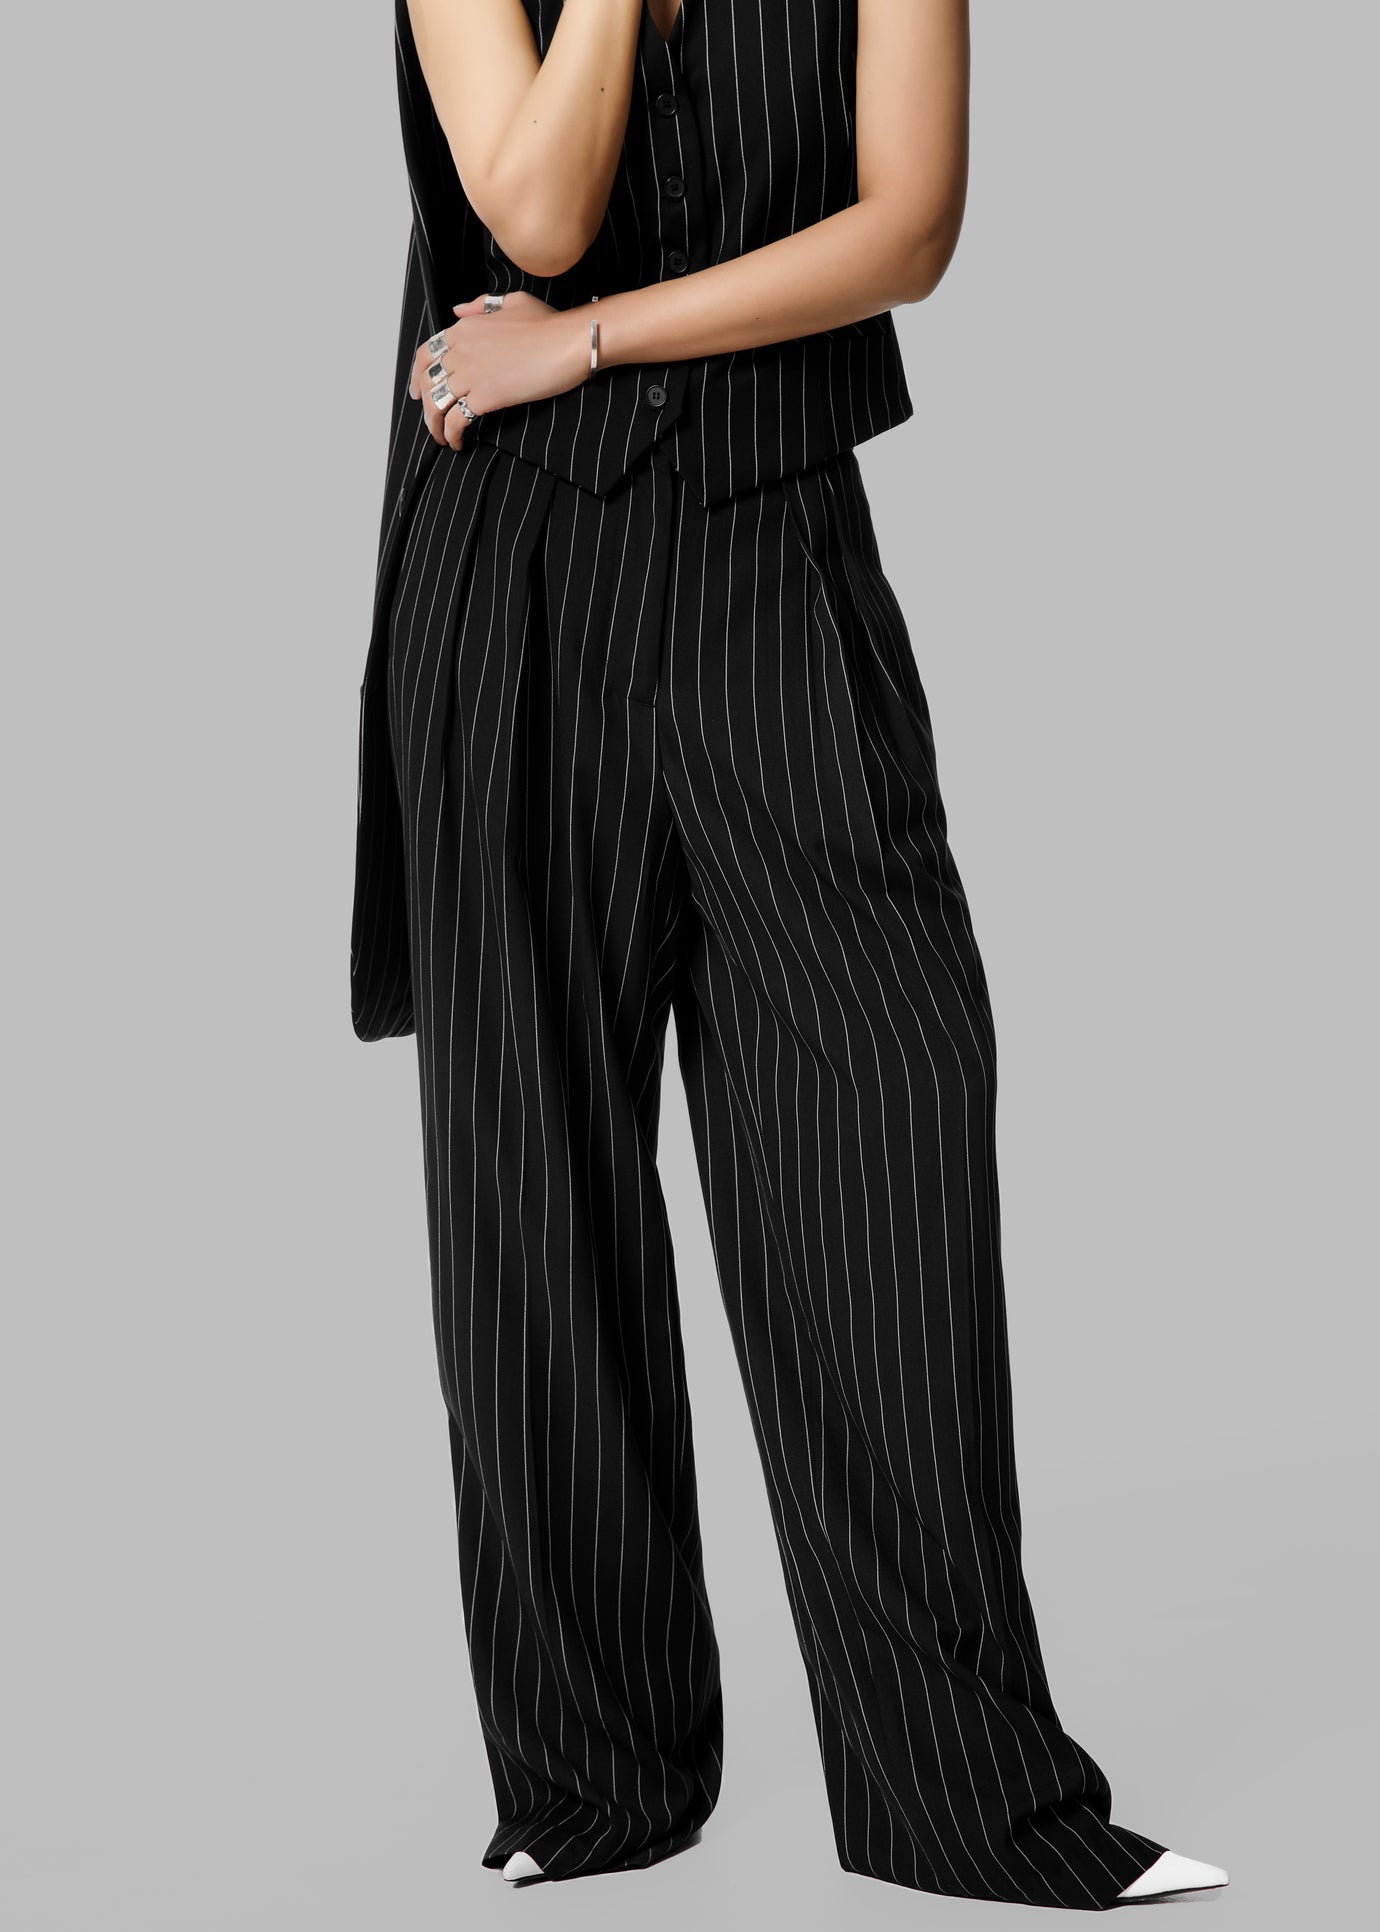 Holland Pleated Trousers - Black/White Pinstripe